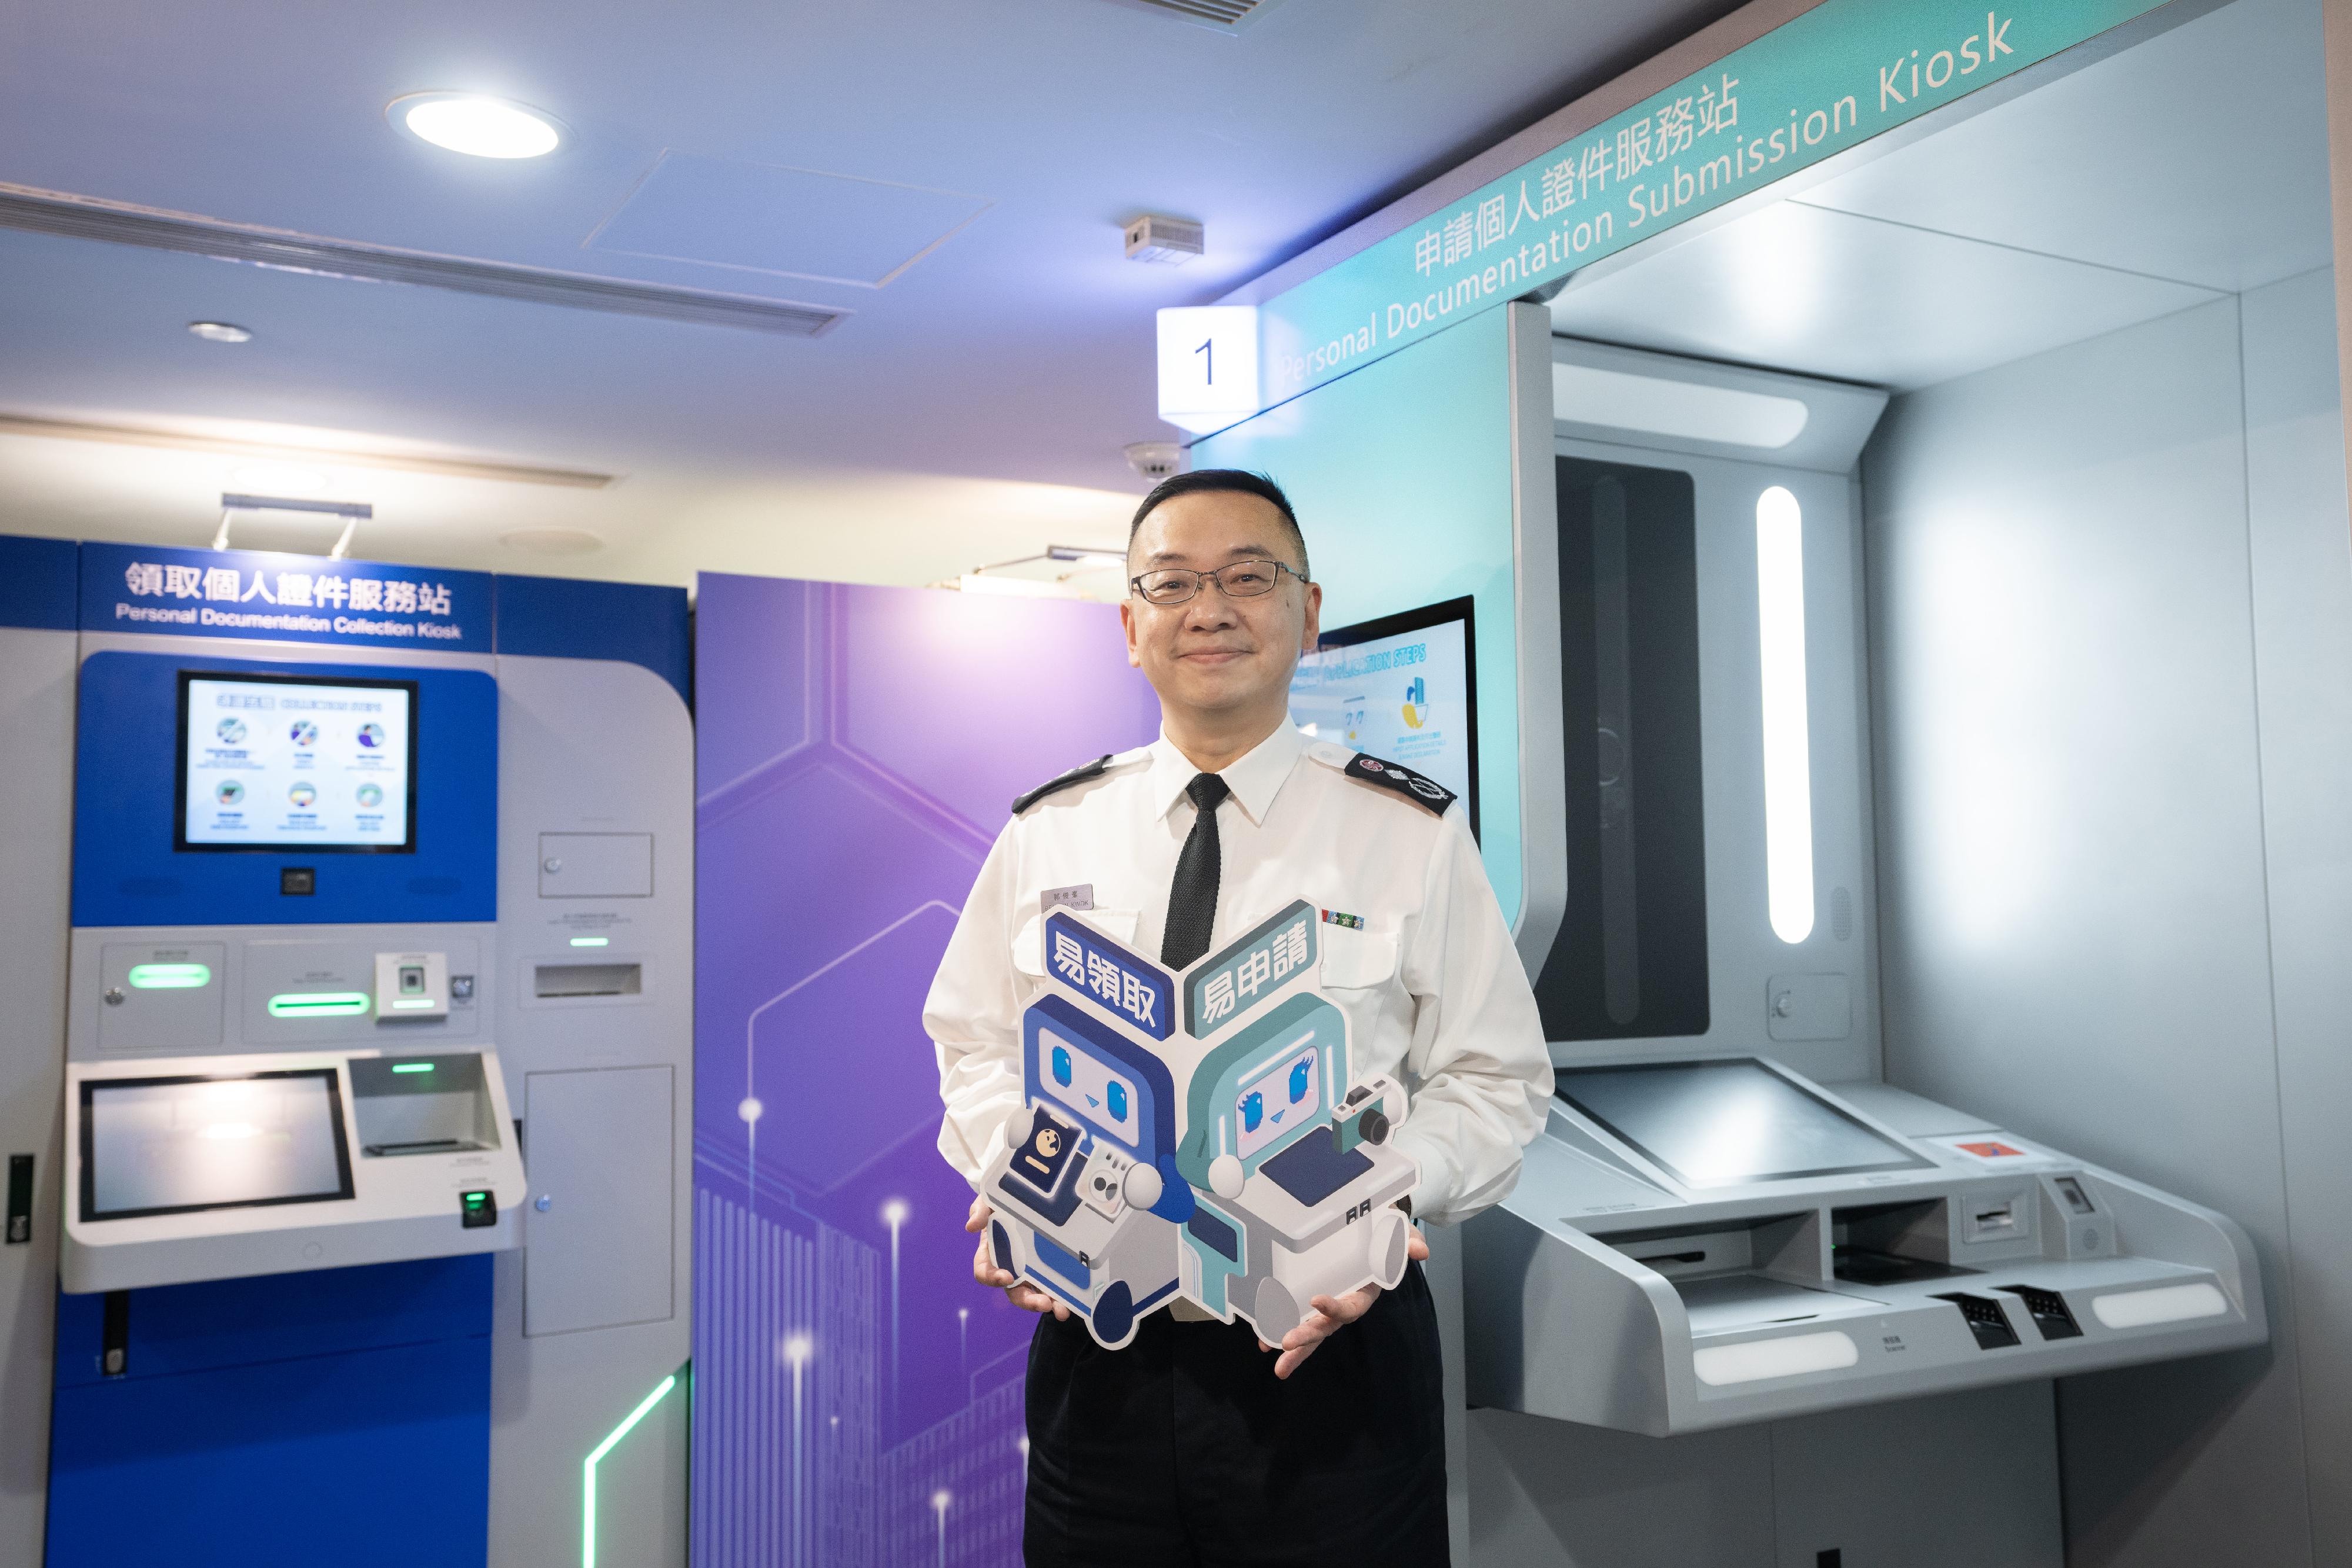 The Immigration Department's year-end review of 2023 was held today (February 8). Photo shows the Director of Immigration, Mr Benson Kwok, introducing the new Personal Documentation Submission Kiosk and Personal Documentation Collection Kiosk.